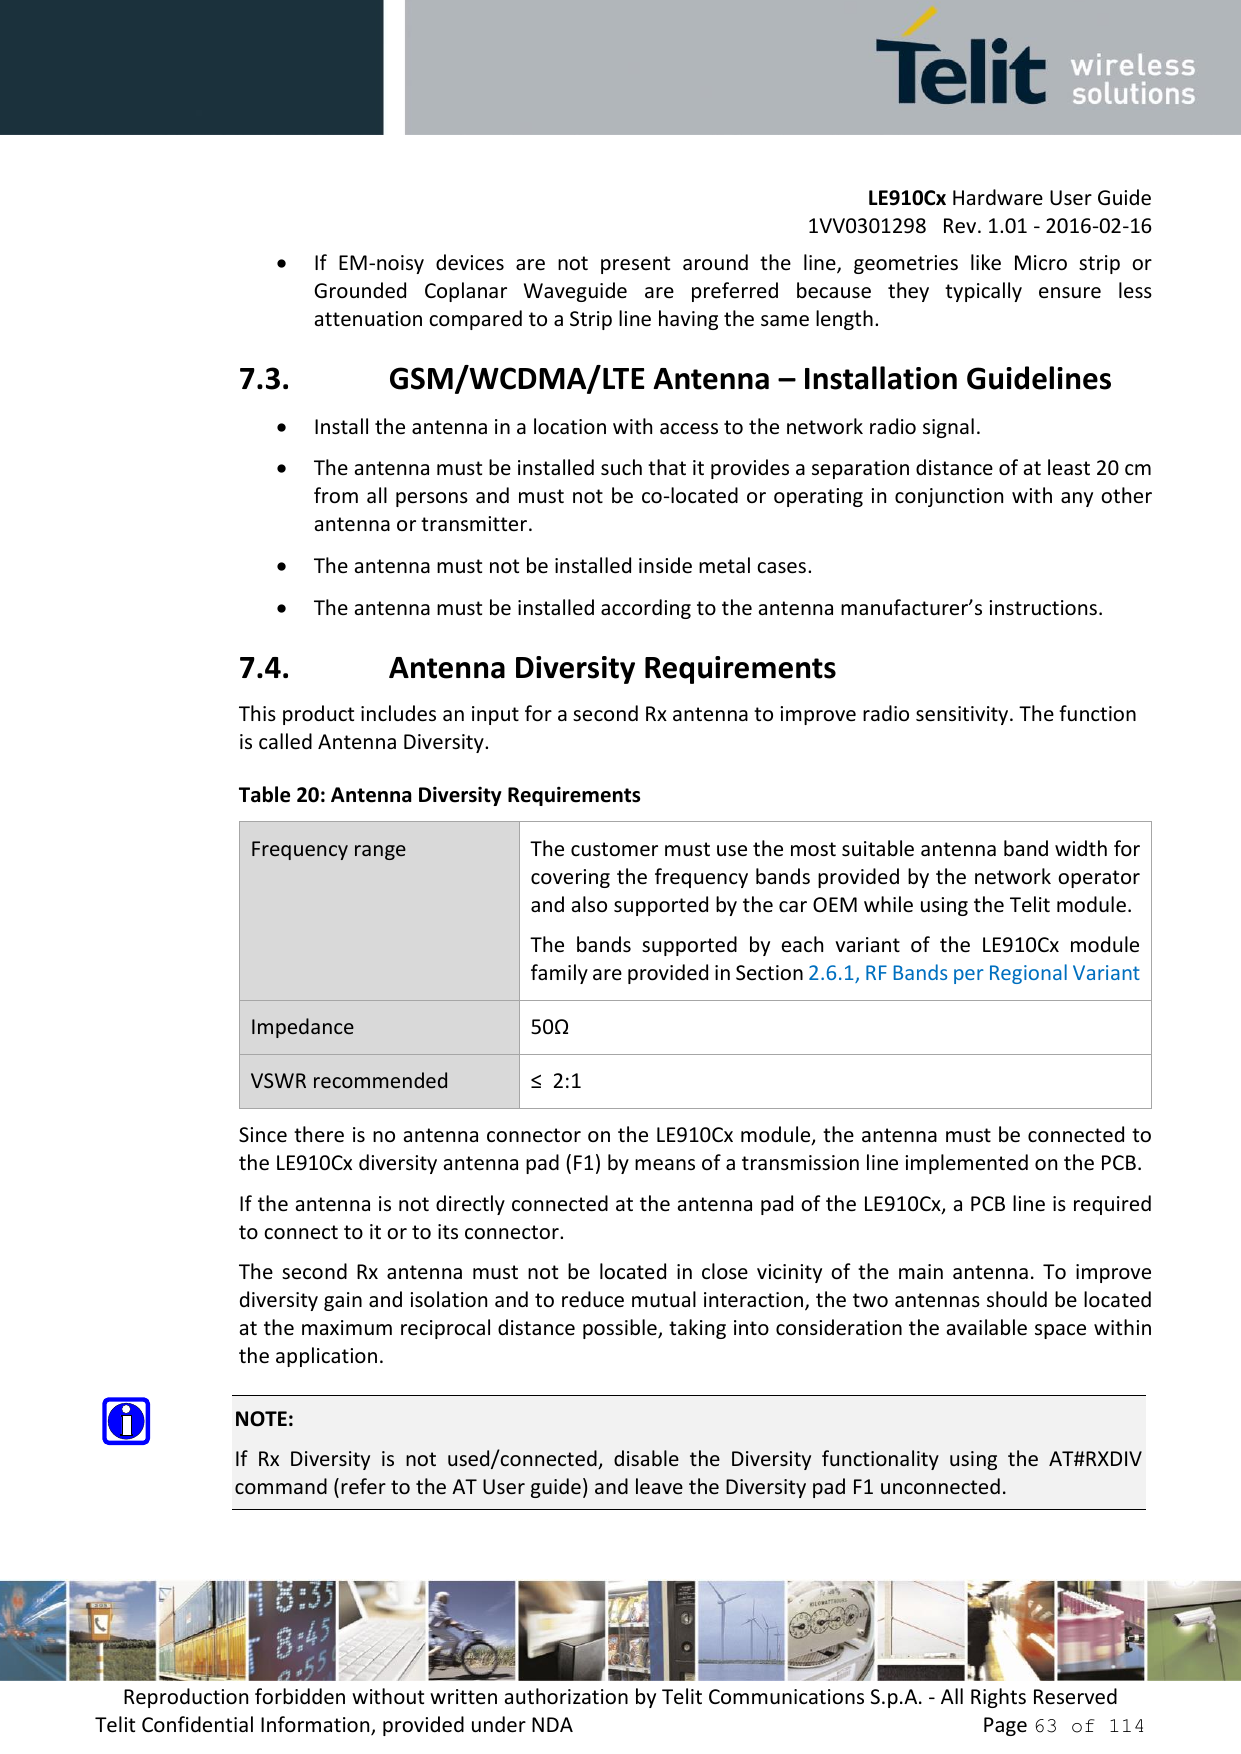         LE910Cx Hardware User Guide     1VV0301298   Rev. 1.01 - 2016-02-16 Reproduction forbidden without written authorization by Telit Communications S.p.A. - All Rights Reserved Telit Confidential Information, provided under NDA                 Page 63 of 114  If  EM-noisy  devices  are  not  present  around  the  line,  geometries  like  Micro  strip  or Grounded  Coplanar  Waveguide  are  preferred  because  they  typically  ensure  less attenuation compared to a Strip line having the same length. 7.3. GSM/WCDMA/LTE Antenna – Installation Guidelines  Install the antenna in a location with access to the network radio signal.  The antenna must be installed such that it provides a separation distance of at least 20 cm from all persons and must not be co-located or operating in conjunction with any other antenna or transmitter.  The antenna must not be installed inside metal cases.   The antenna must be installed according to the antenna manufacturer’s instructions. 7.4. Antenna Diversity Requirements This product includes an input for a second Rx antenna to improve radio sensitivity. The function is called Antenna Diversity. Table 20: Antenna Diversity Requirements Frequency range The customer must use the most suitable antenna band width for covering the frequency bands provided by the network operator and also supported by the car OEM while using the Telit module.  The  bands  supported  by  each  variant  of  the  LE910Cx  module family are provided in Section 2.6.1, RF Bands per Regional Variant Impedance 50Ω VSWR recommended ≤  2:1 Since there is no antenna connector on the LE910Cx module, the antenna must be connected to the LE910Cx diversity antenna pad (F1) by means of a transmission line implemented on the PCB. If the antenna is not directly connected at the antenna pad of the LE910Cx, a PCB line is required to connect to it or to its connector. The  second  Rx  antenna  must  not  be  located  in  close  vicinity  of  the  main  antenna.  To  improve diversity gain and isolation and to reduce mutual interaction, the two antennas should be located at the maximum reciprocal distance possible, taking into consideration the available space within the application.  NOTE: If  Rx  Diversity  is  not  used/connected,  disable  the  Diversity  functionality  using  the  AT#RXDIV command (refer to the AT User guide) and leave the Diversity pad F1 unconnected. 